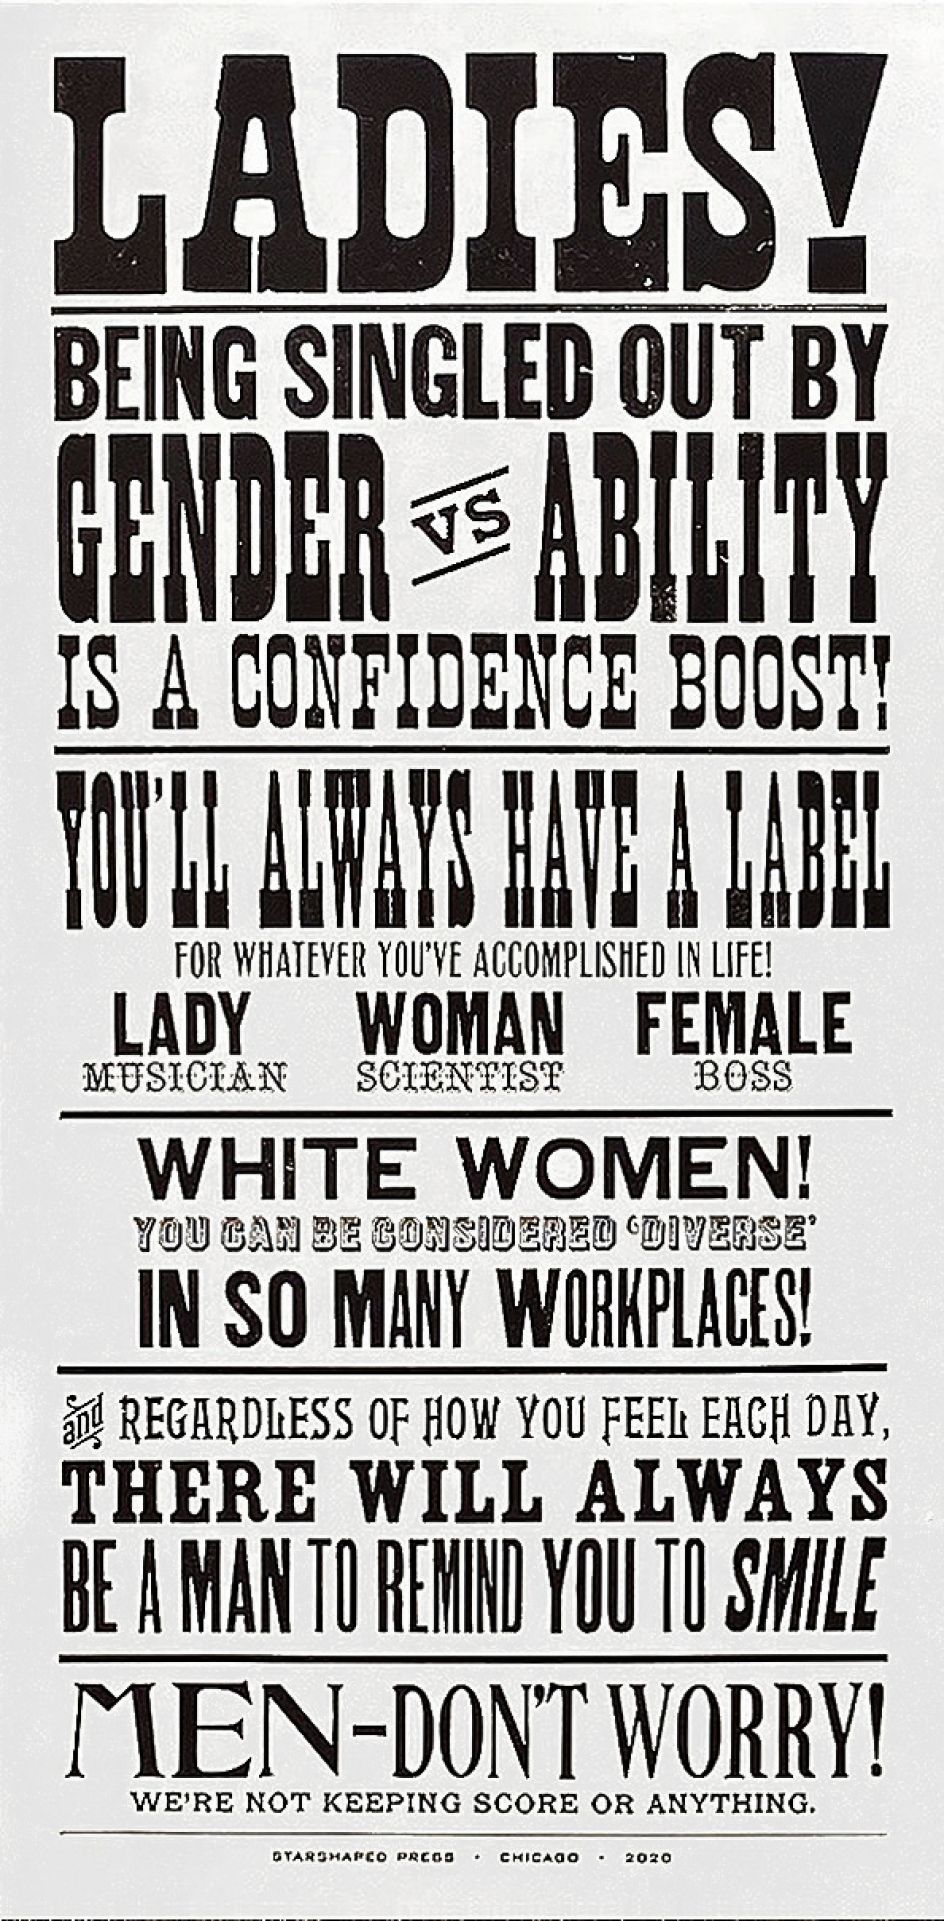 Ladies! Being Singled Out by Gender vs. Ability is a Confidence Boost! © Jennifer Farrell, Starshaped Press